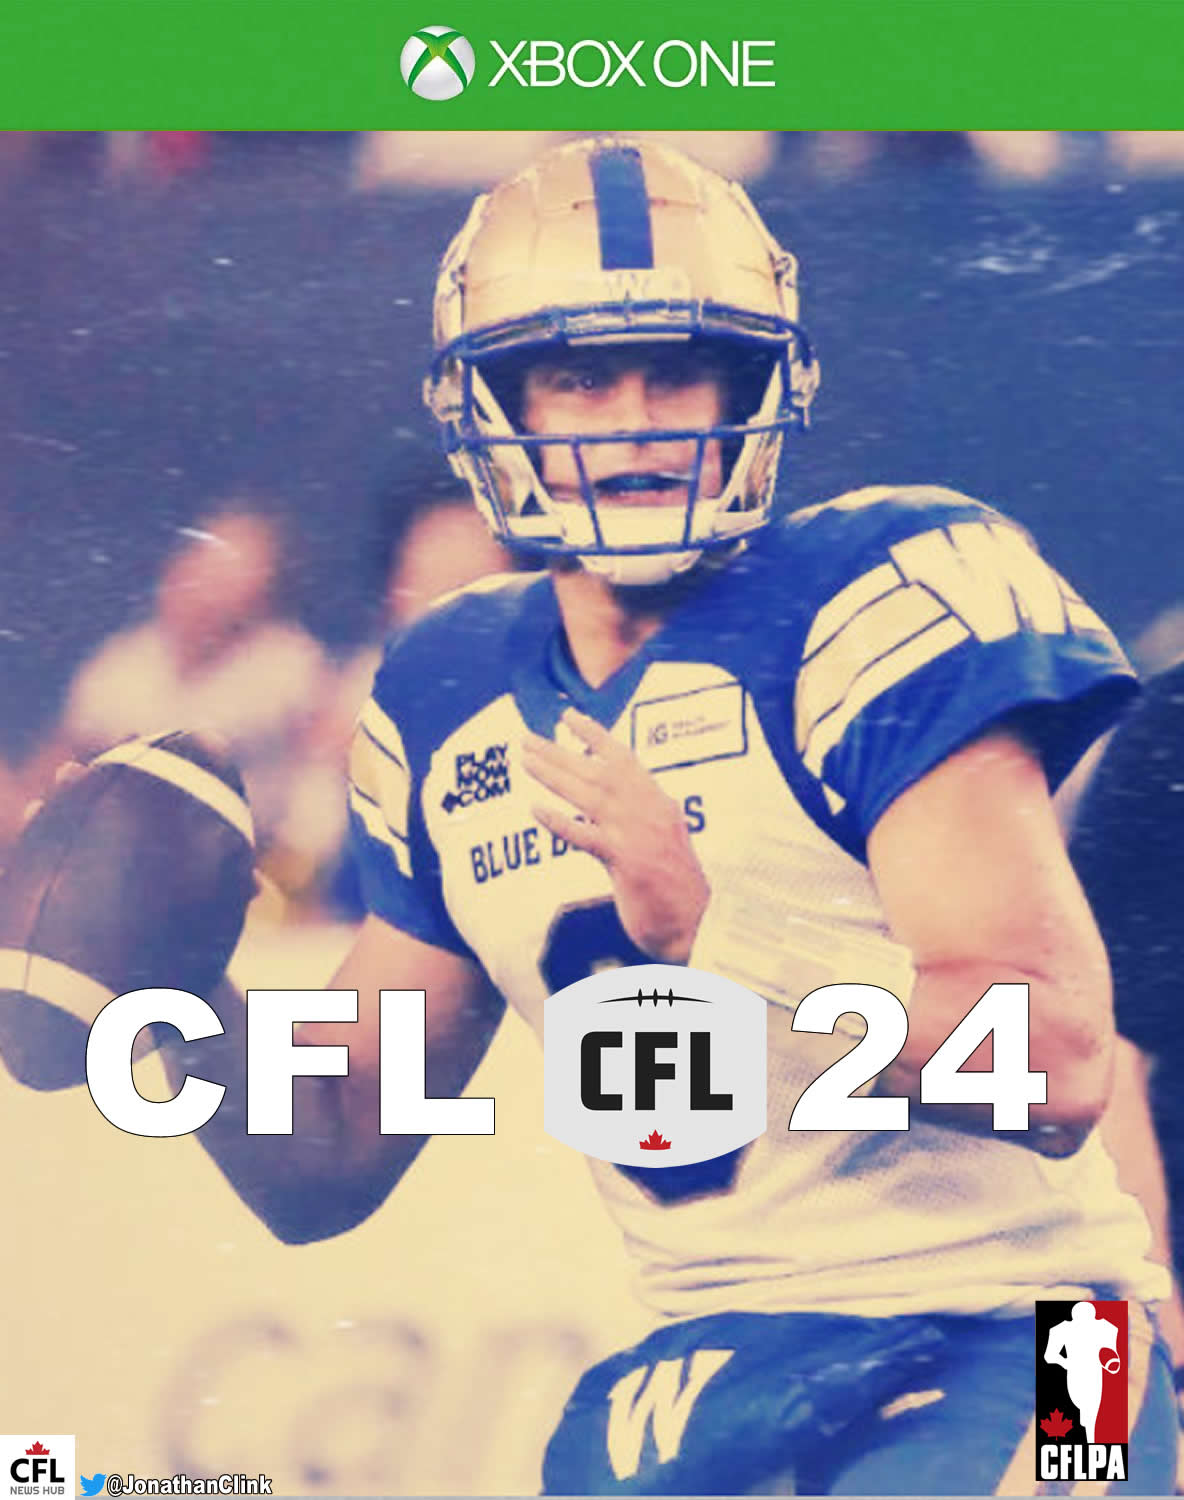 Its Time For a CFL Video Game! Heres How to Make it Happen